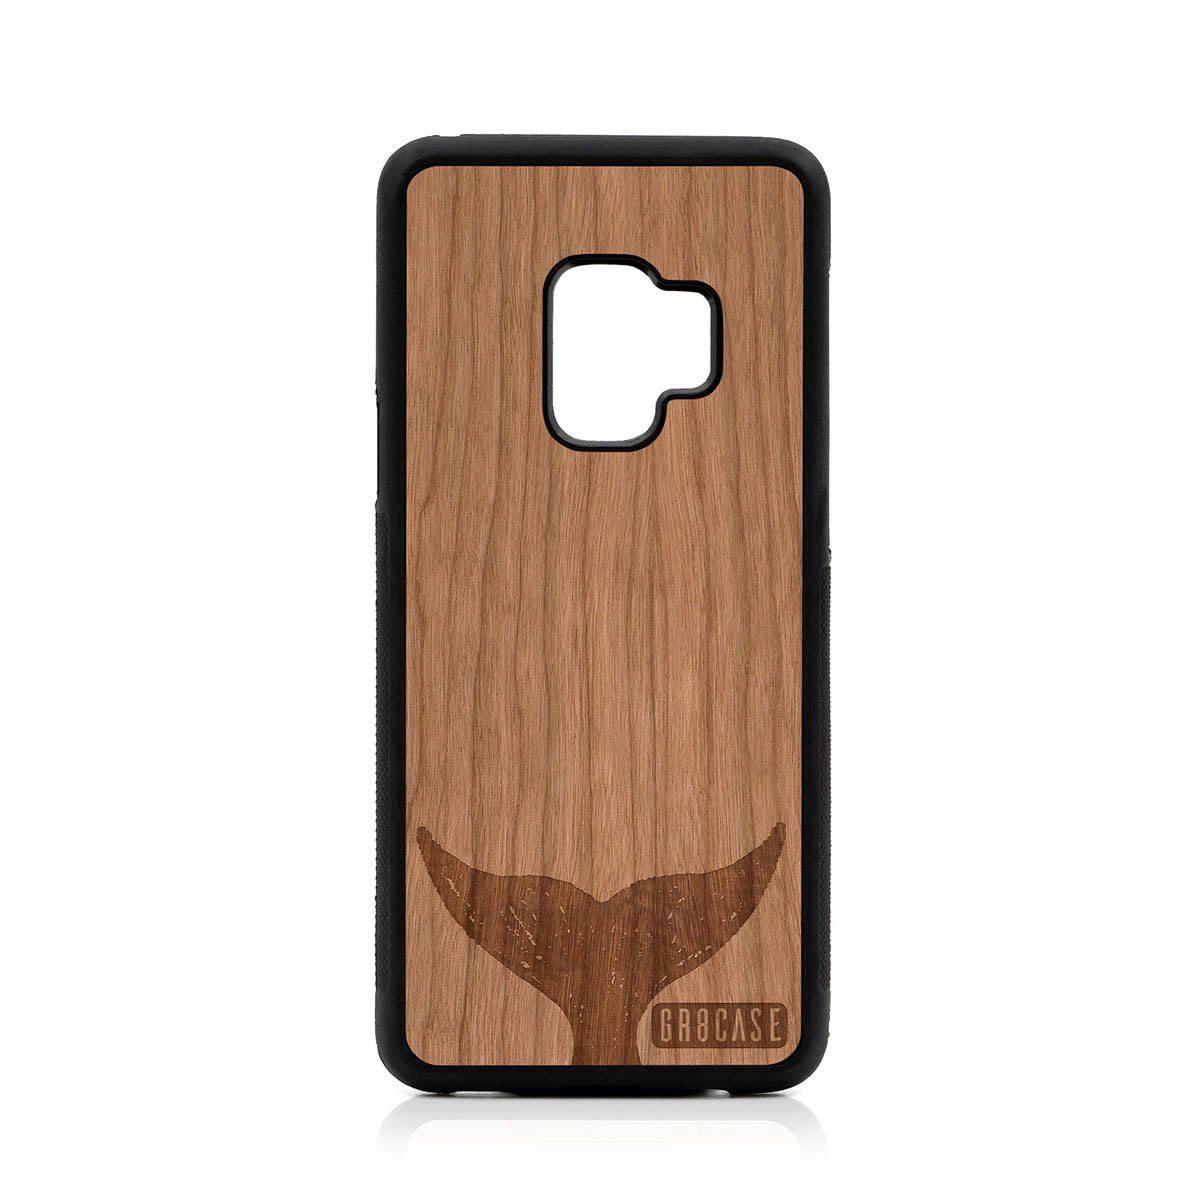 Whale Tail Design Wood Case For Samsung Galaxy S9